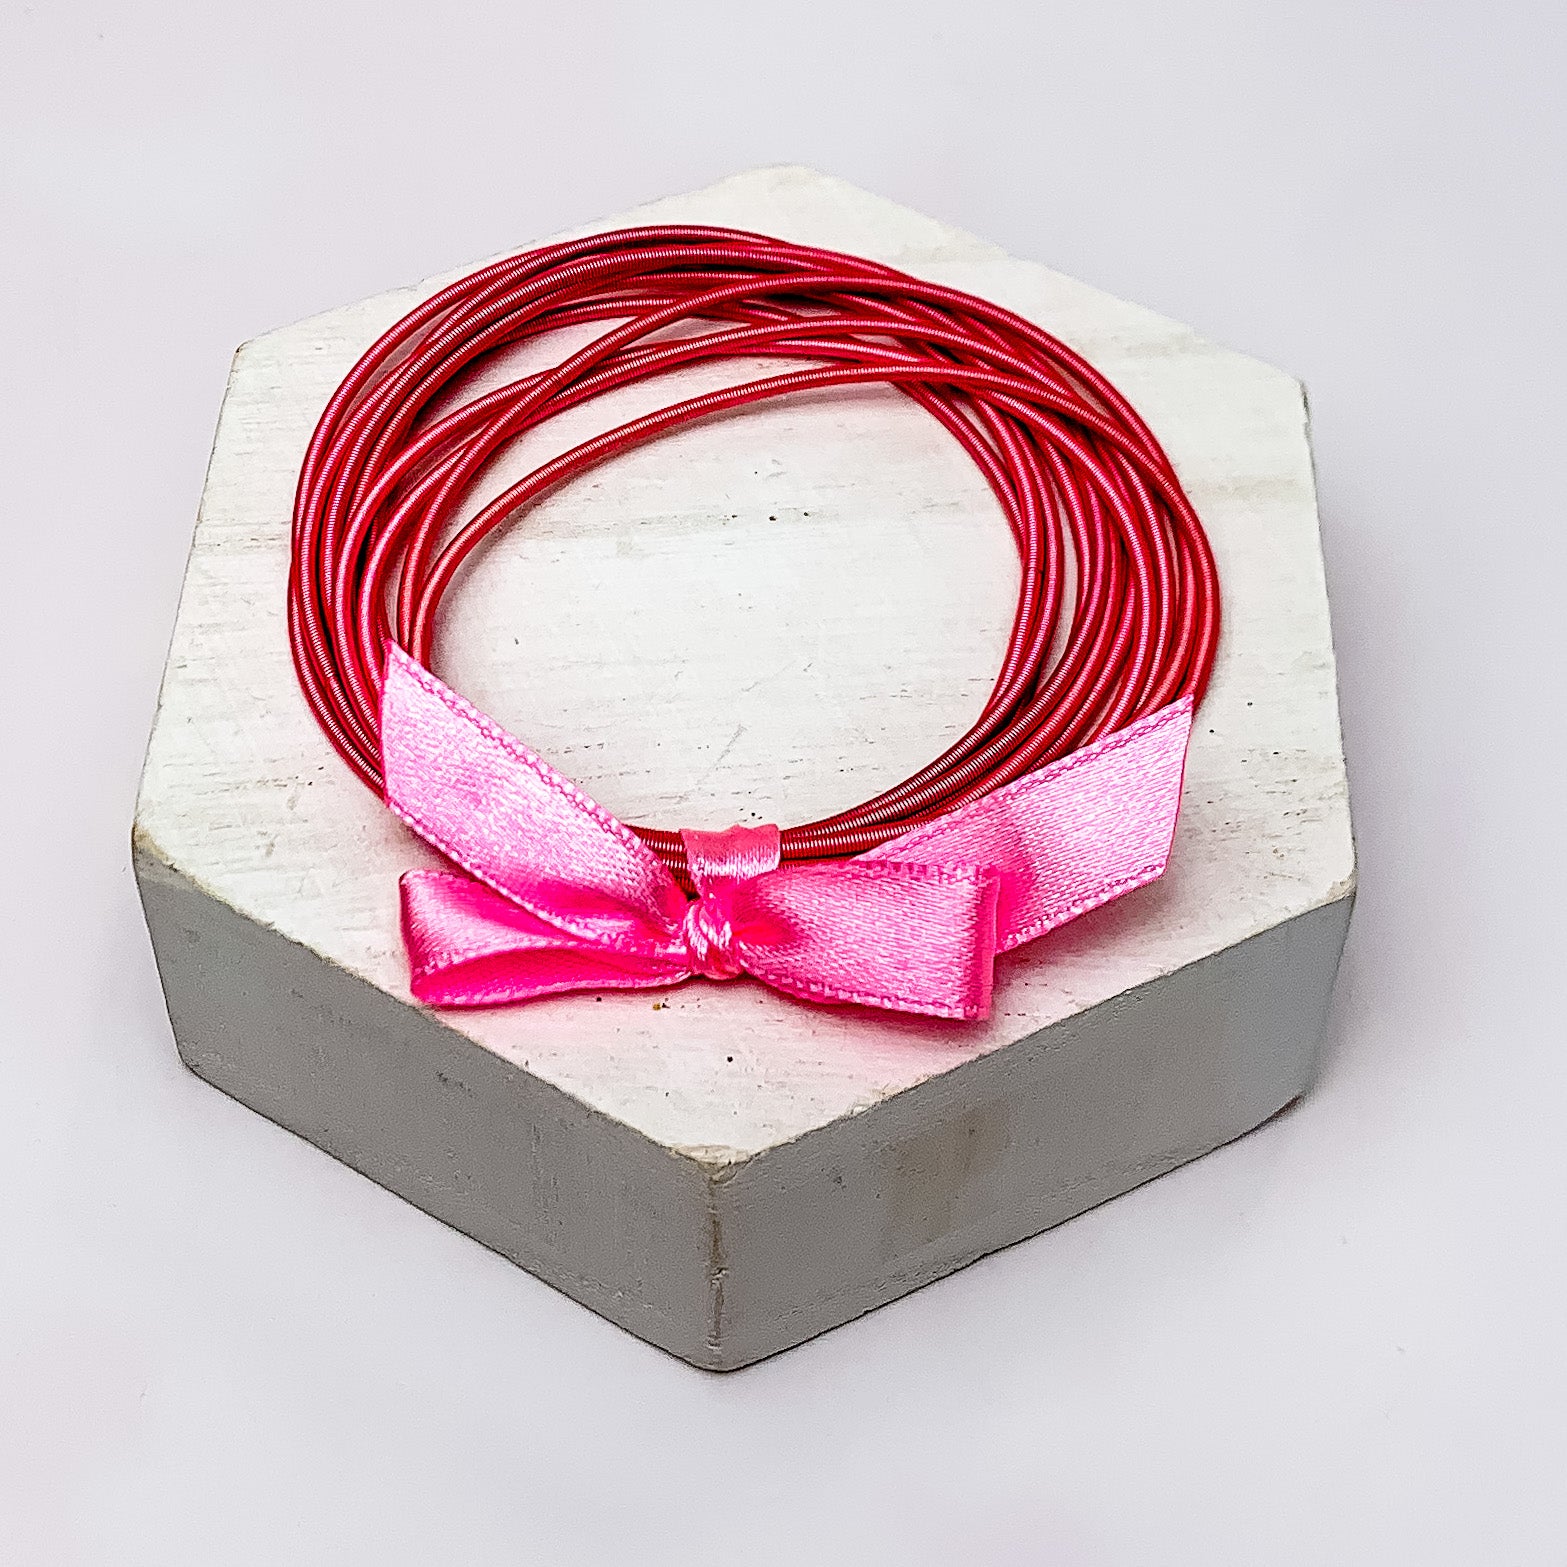 Guitar String Bracelets with Bow in Dark Pink. Pictured on a white background sitting on top of a white block.